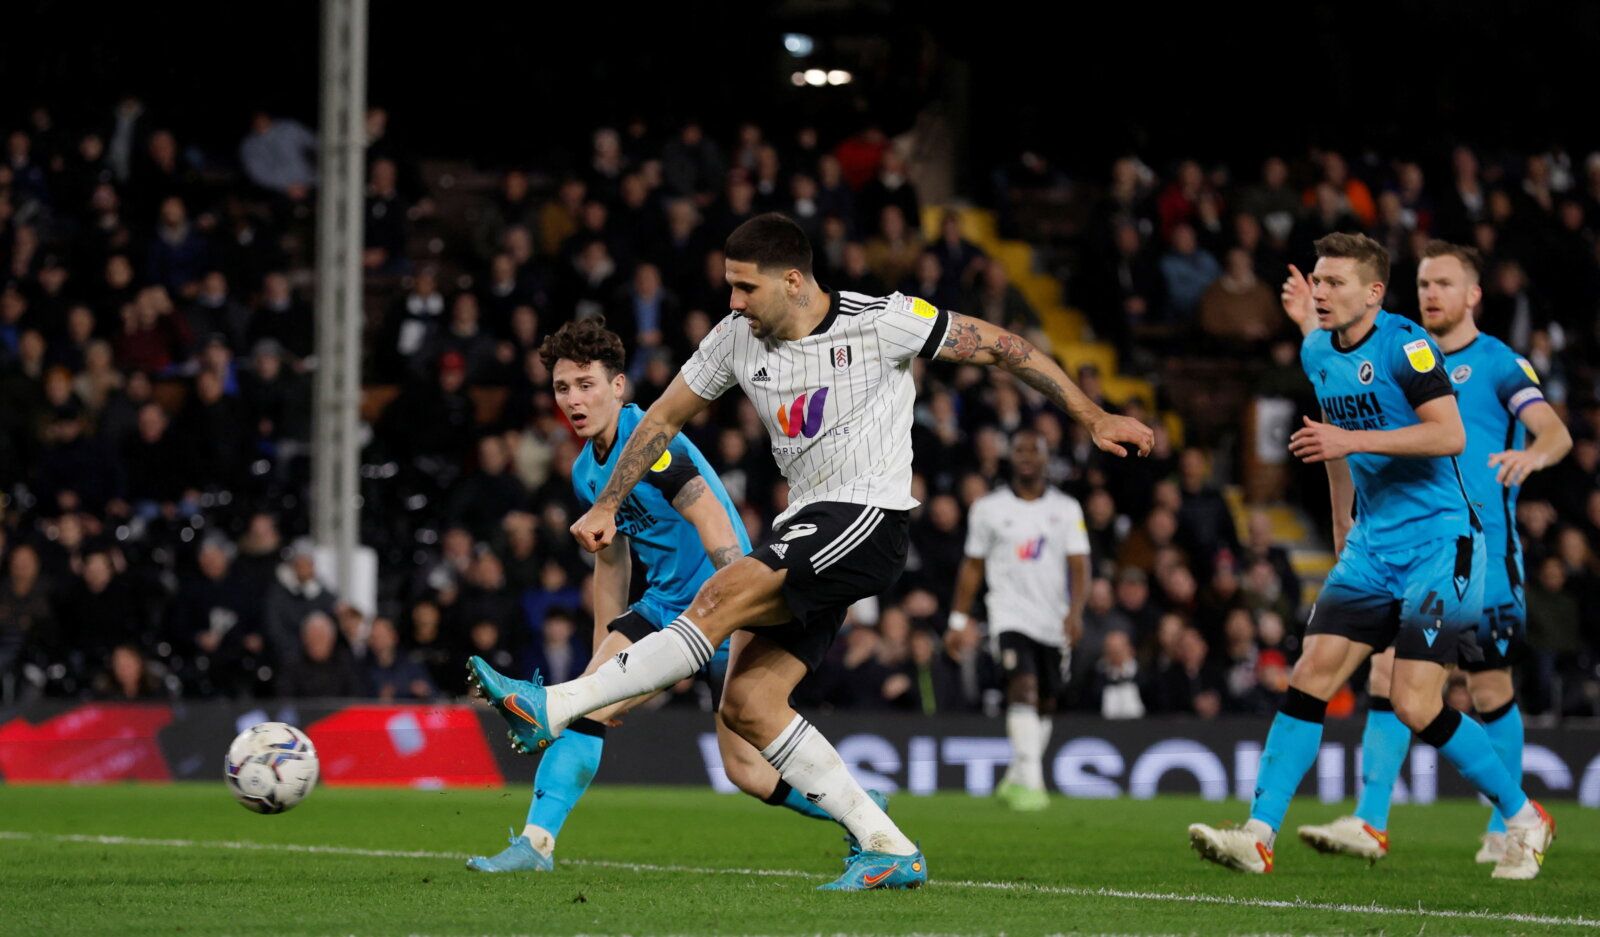 Soccer Football - Championship - Fulham v Millwall - Craven Cottage, London, Britain - February 8, 2022 Fulham?s Aleksandar Mitrovic scores their second goal  Action Images/Andrew Couldridge  EDITORIAL USE ONLY. No use with unauthorized audio, video, data, fixture lists, club/league logos or 